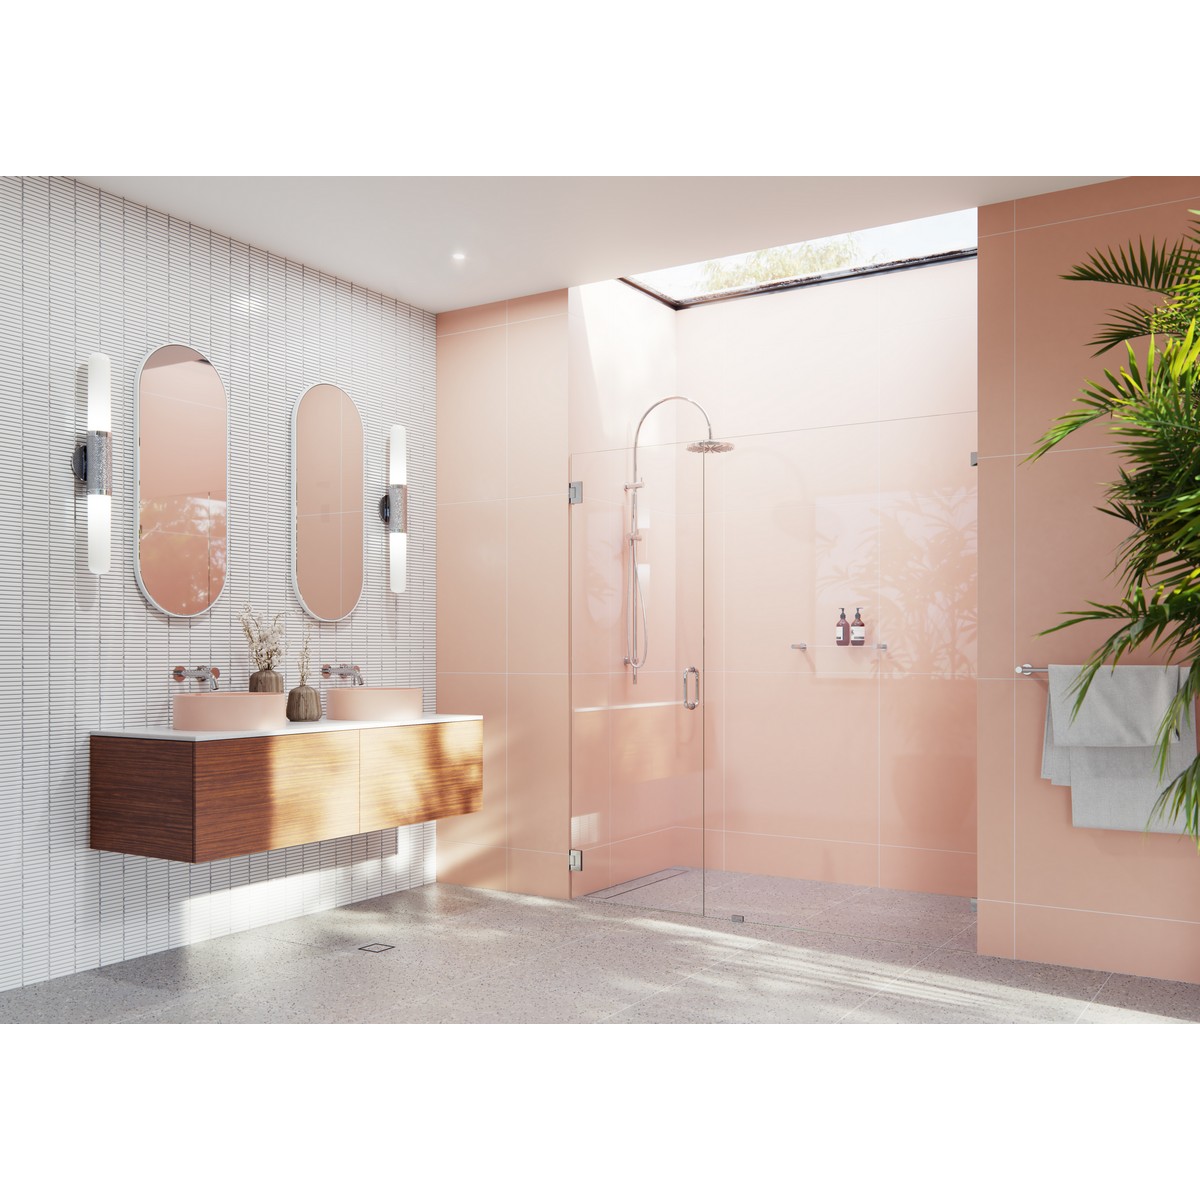 GLASS WAREHOUSE GW-WH-67.25 ILLUME 67 1/4 W X 78 H WALL HINGED FULLY FRAMELESS GLASS SHOWER ENCLOSURE